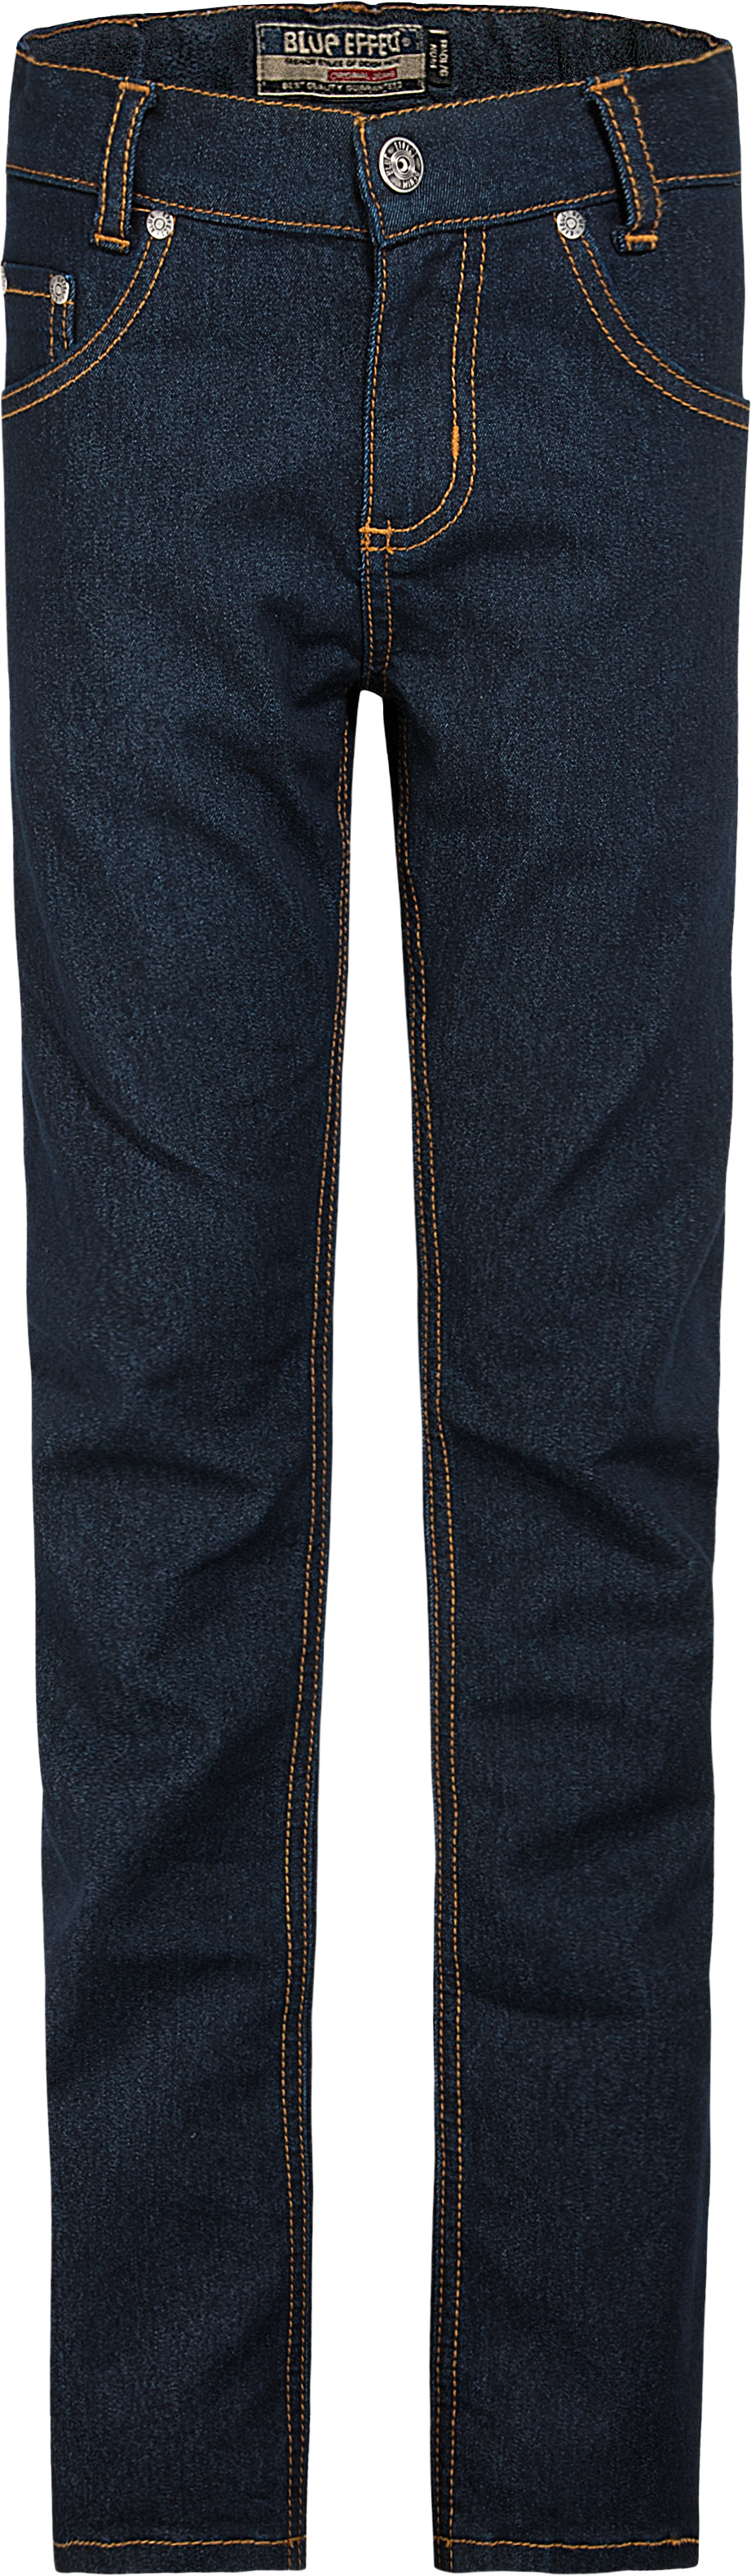 0229-NOS Boys Jeans Skinny available in Slim,Normal,Wide